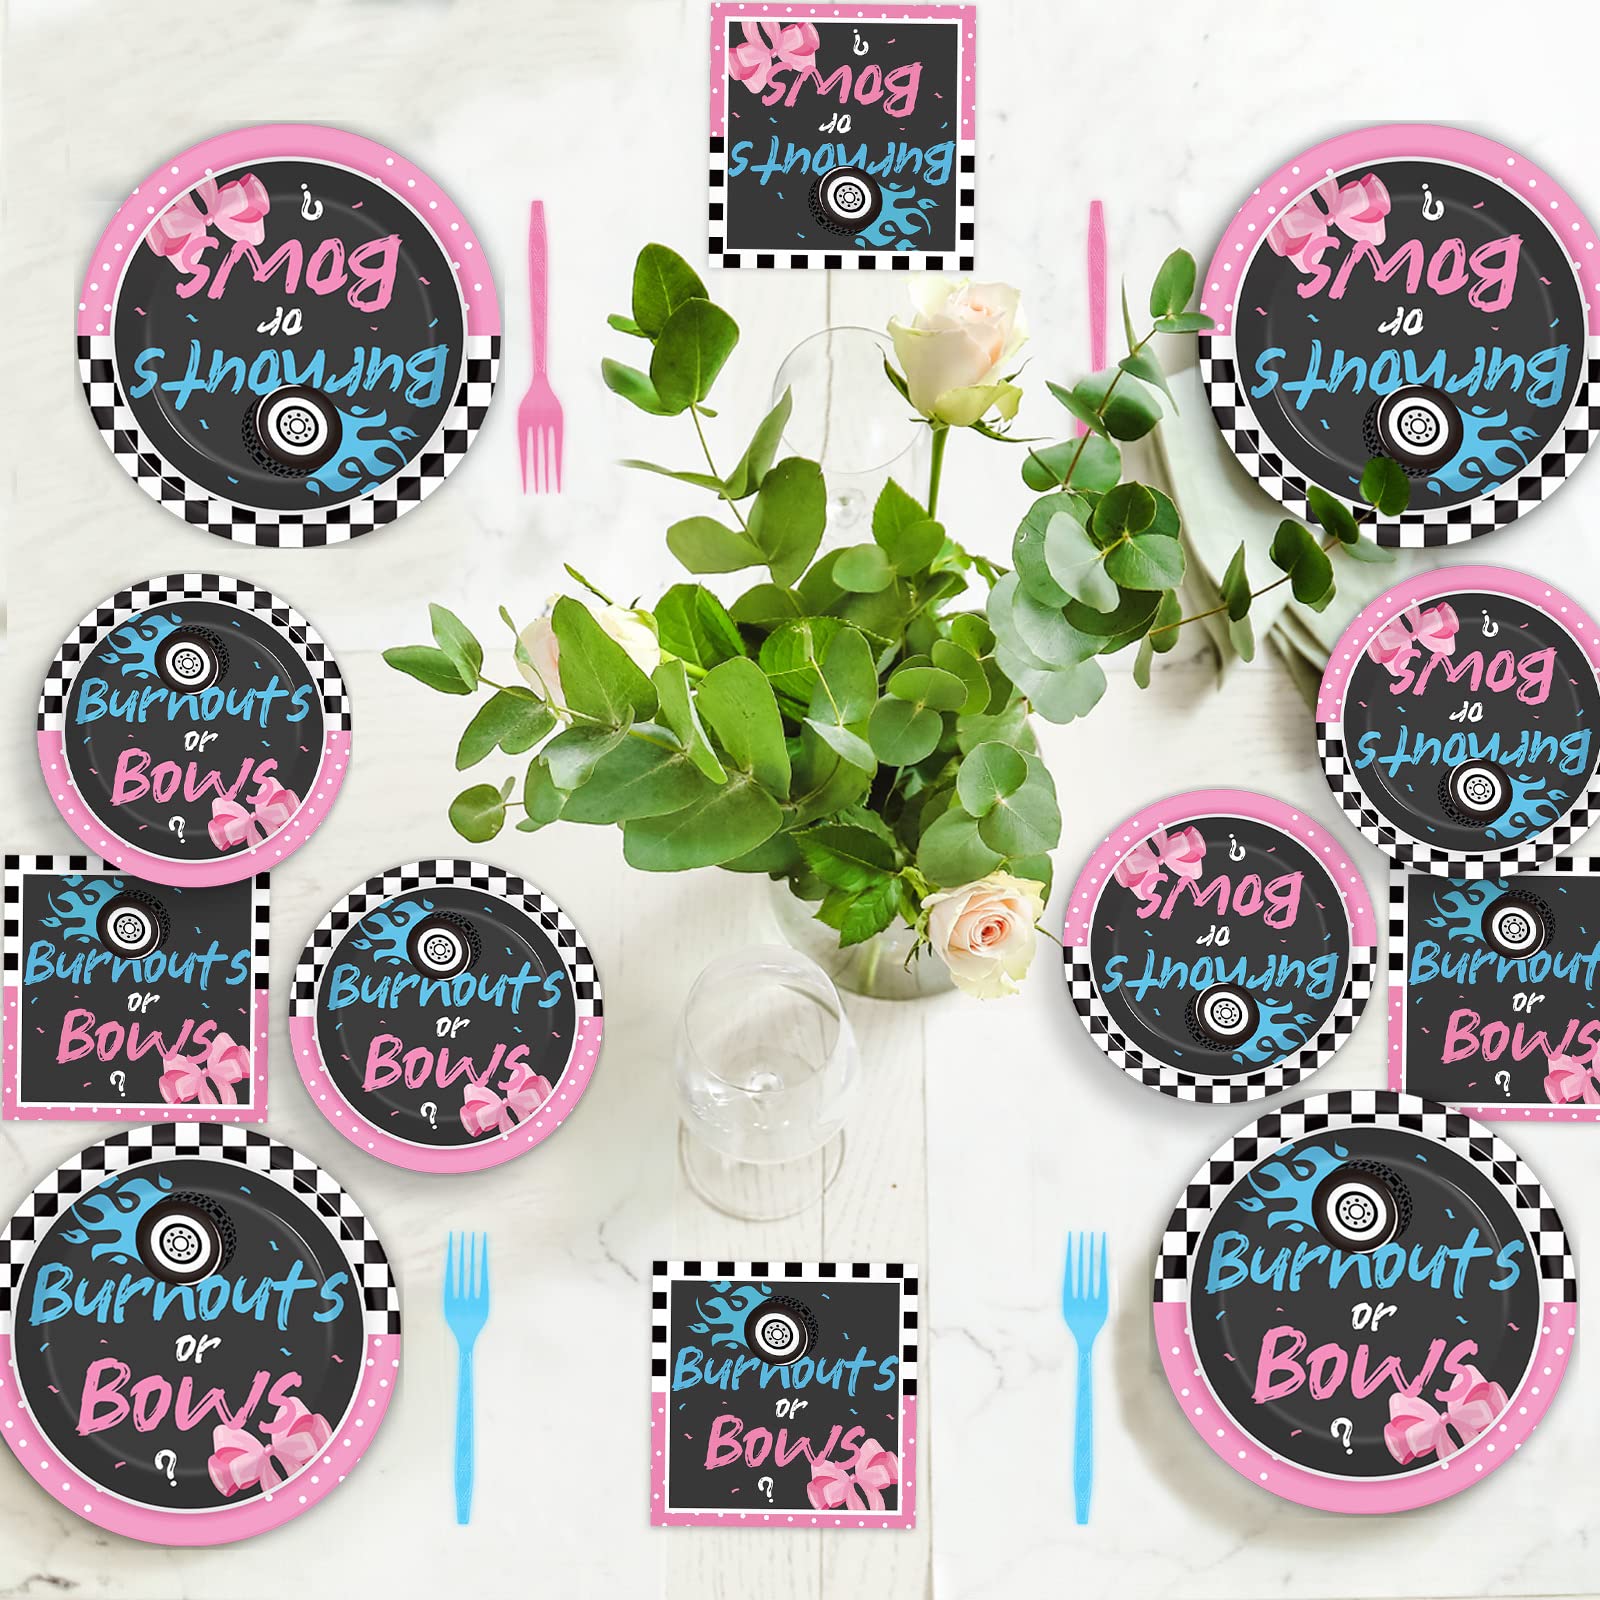 Baby shower plates, napkins and forks